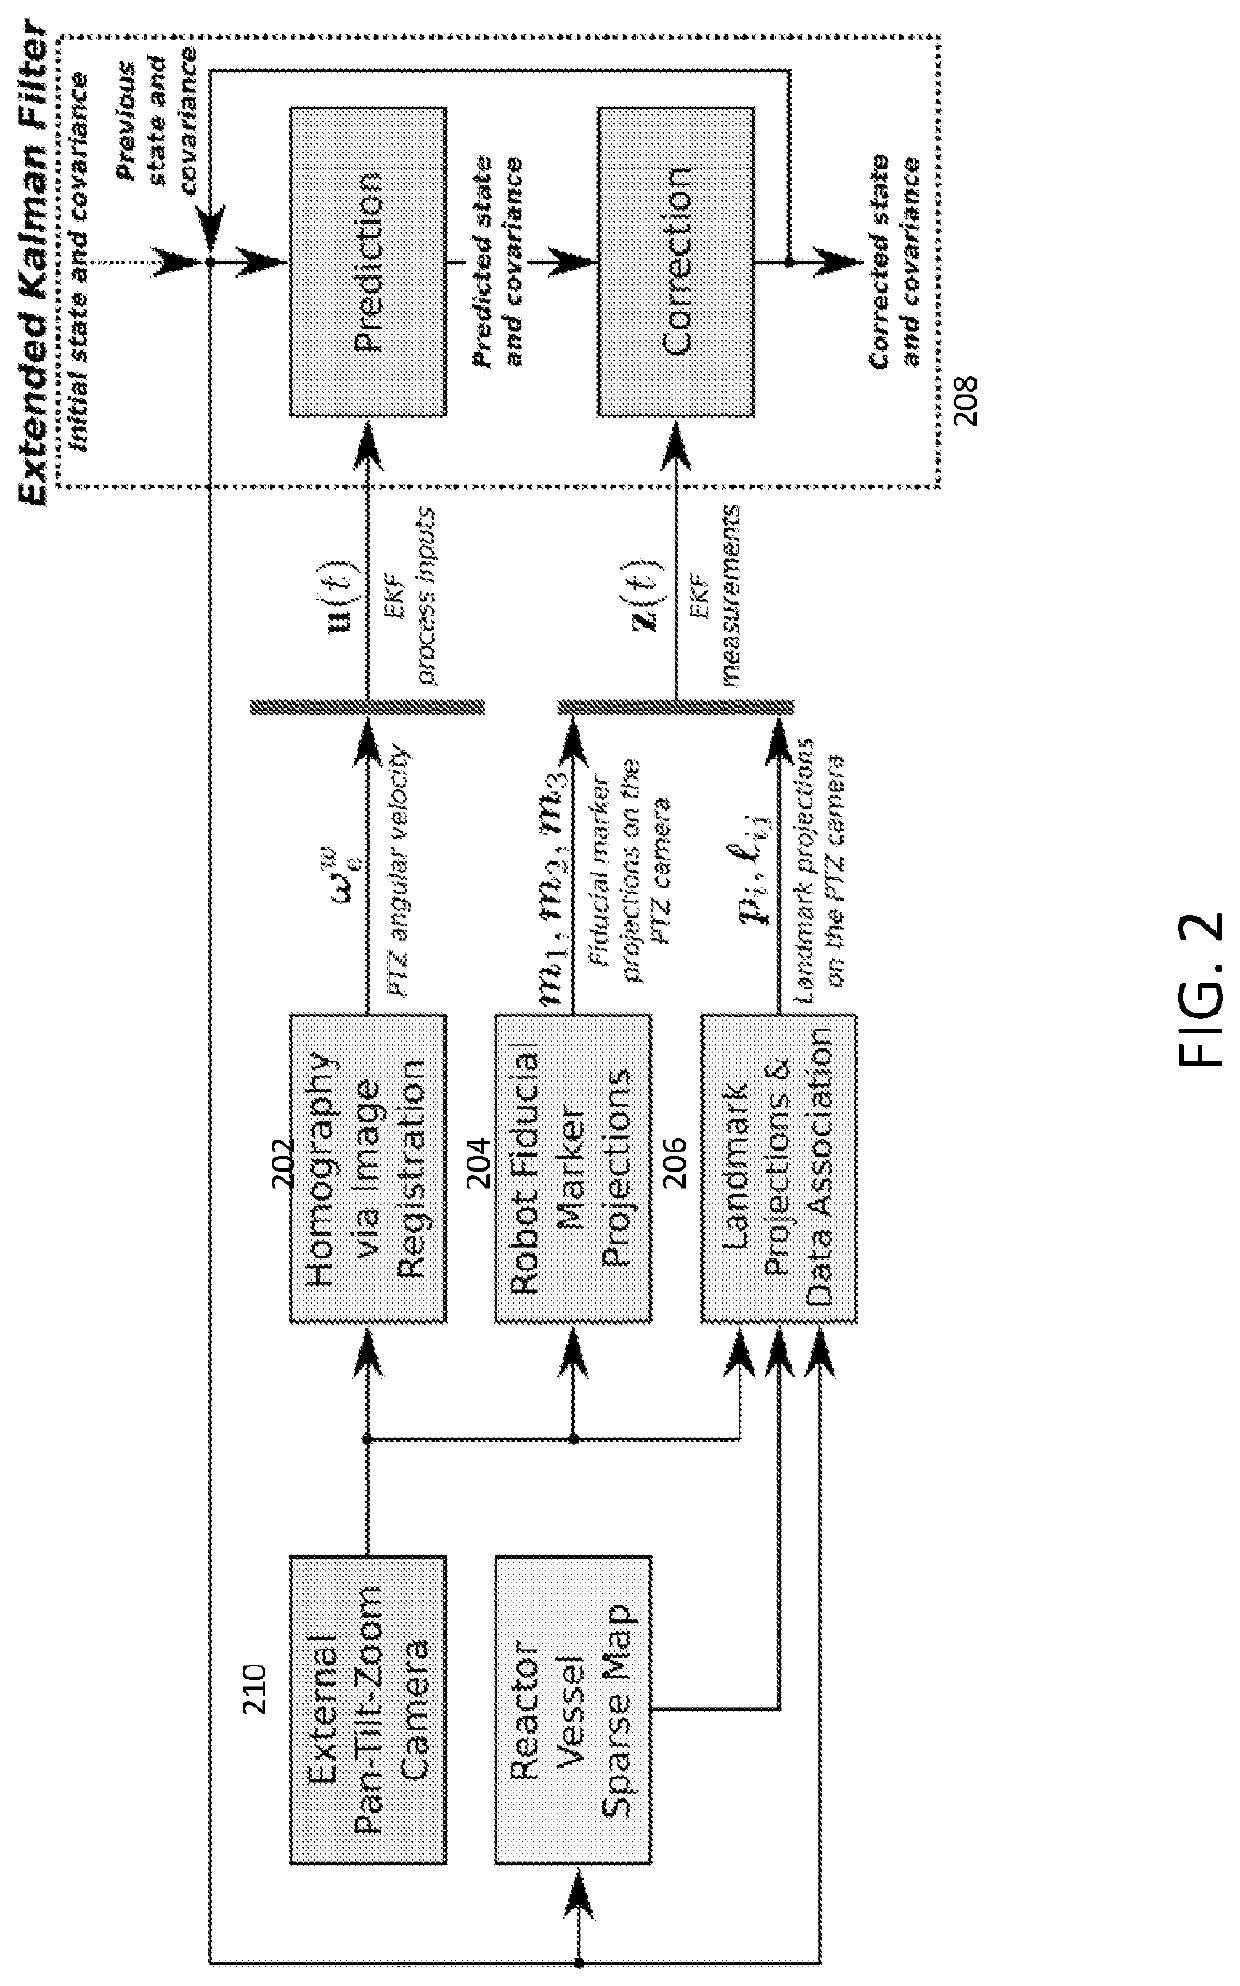 State estimation and localization for ROV-based structural inspection